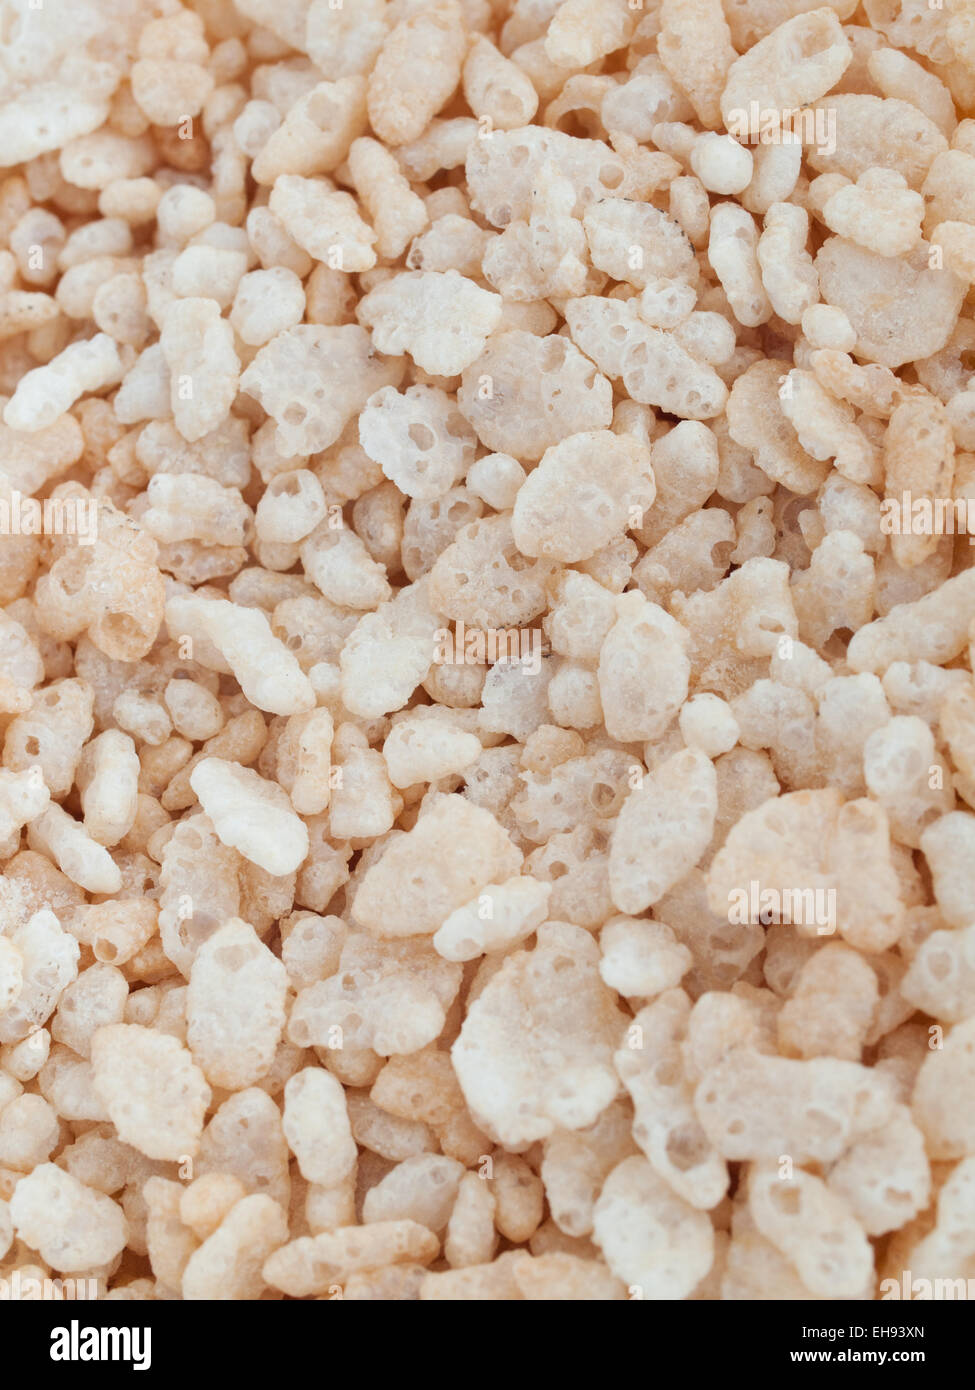 A close-up of Kellogg's Rice Krispies (Rice Bubbles) cereal. Stock Photo